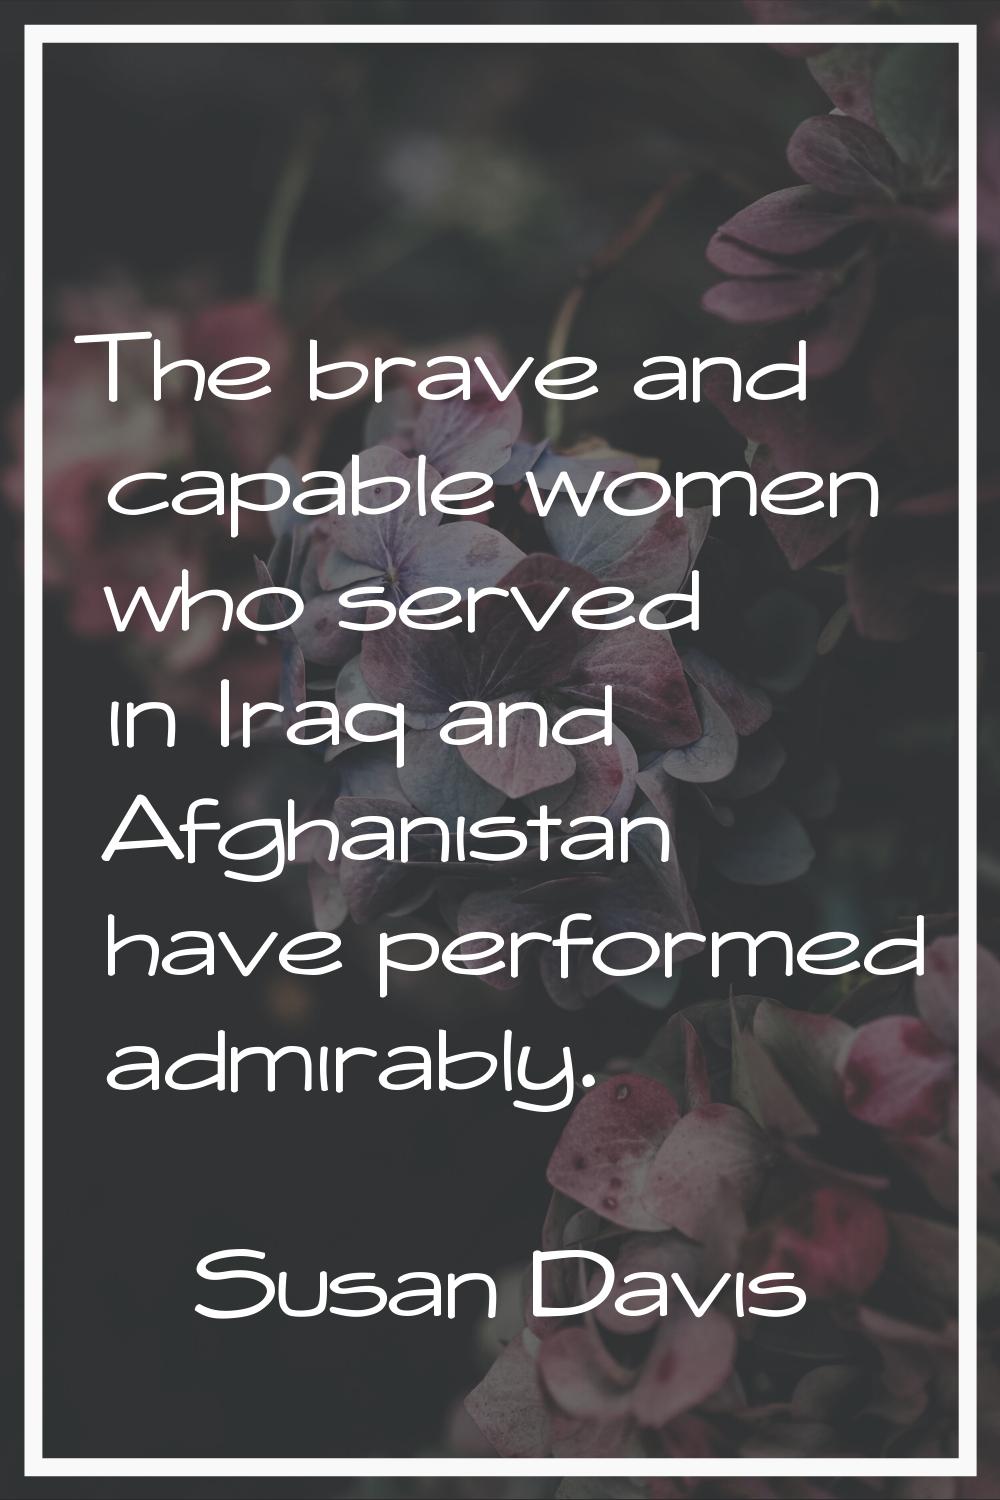 The brave and capable women who served in Iraq and Afghanistan have performed admirably.